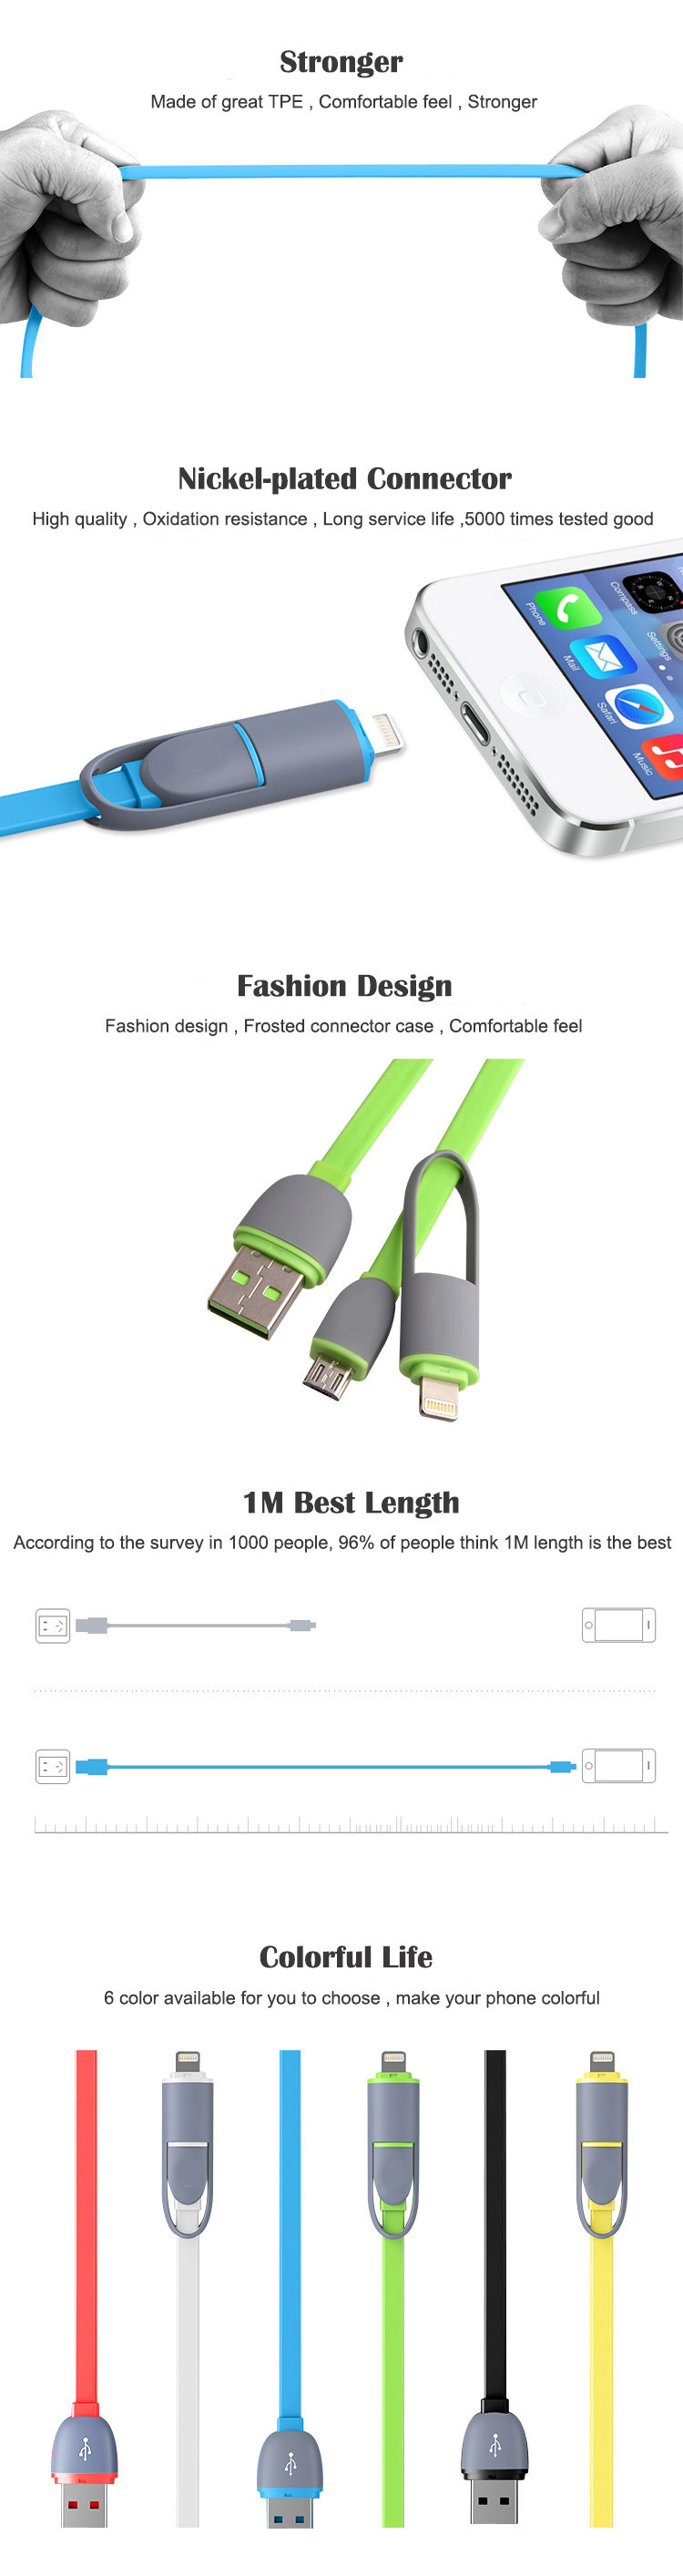 Retractable usb 2 in 1 cable